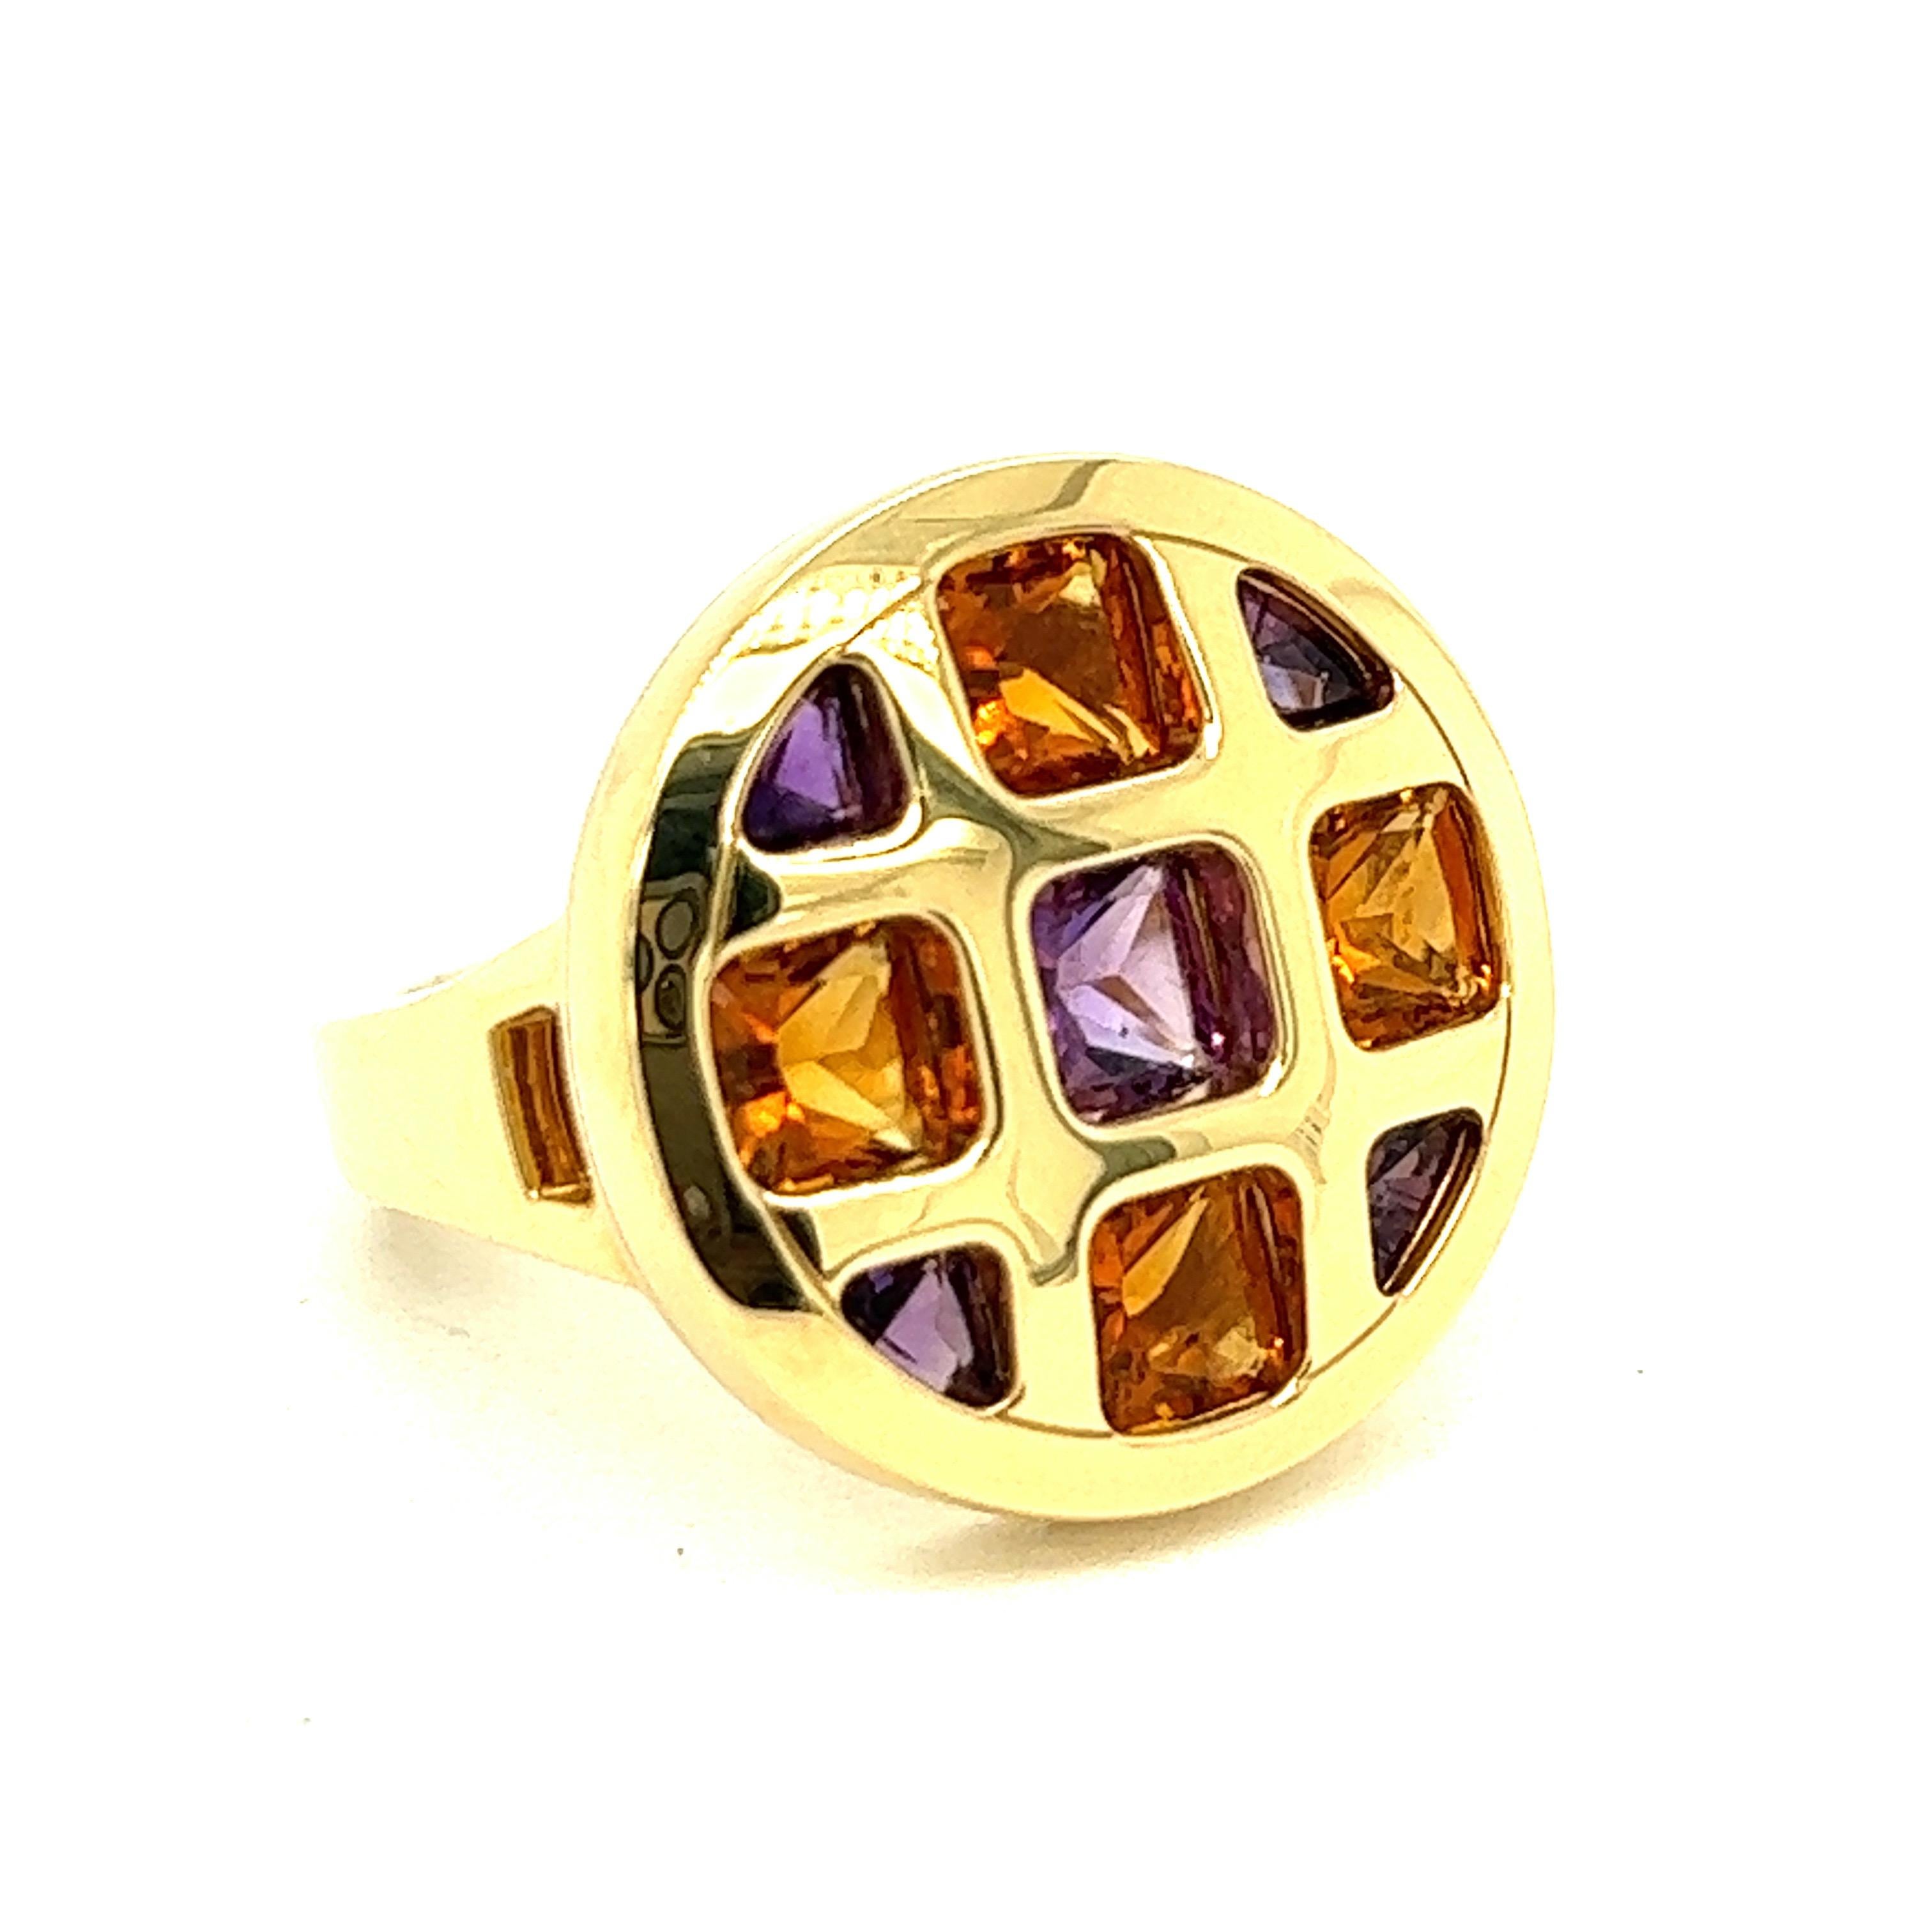 Cartier Pasha Citrine & Amethyst Round Ring

From the Pasha collection, this modern ring features citrine (approximately 2.40 carats) and amethyst (approximately 1.40 carats) gemstones, set on 18 karat yellow gold with square sections on top within